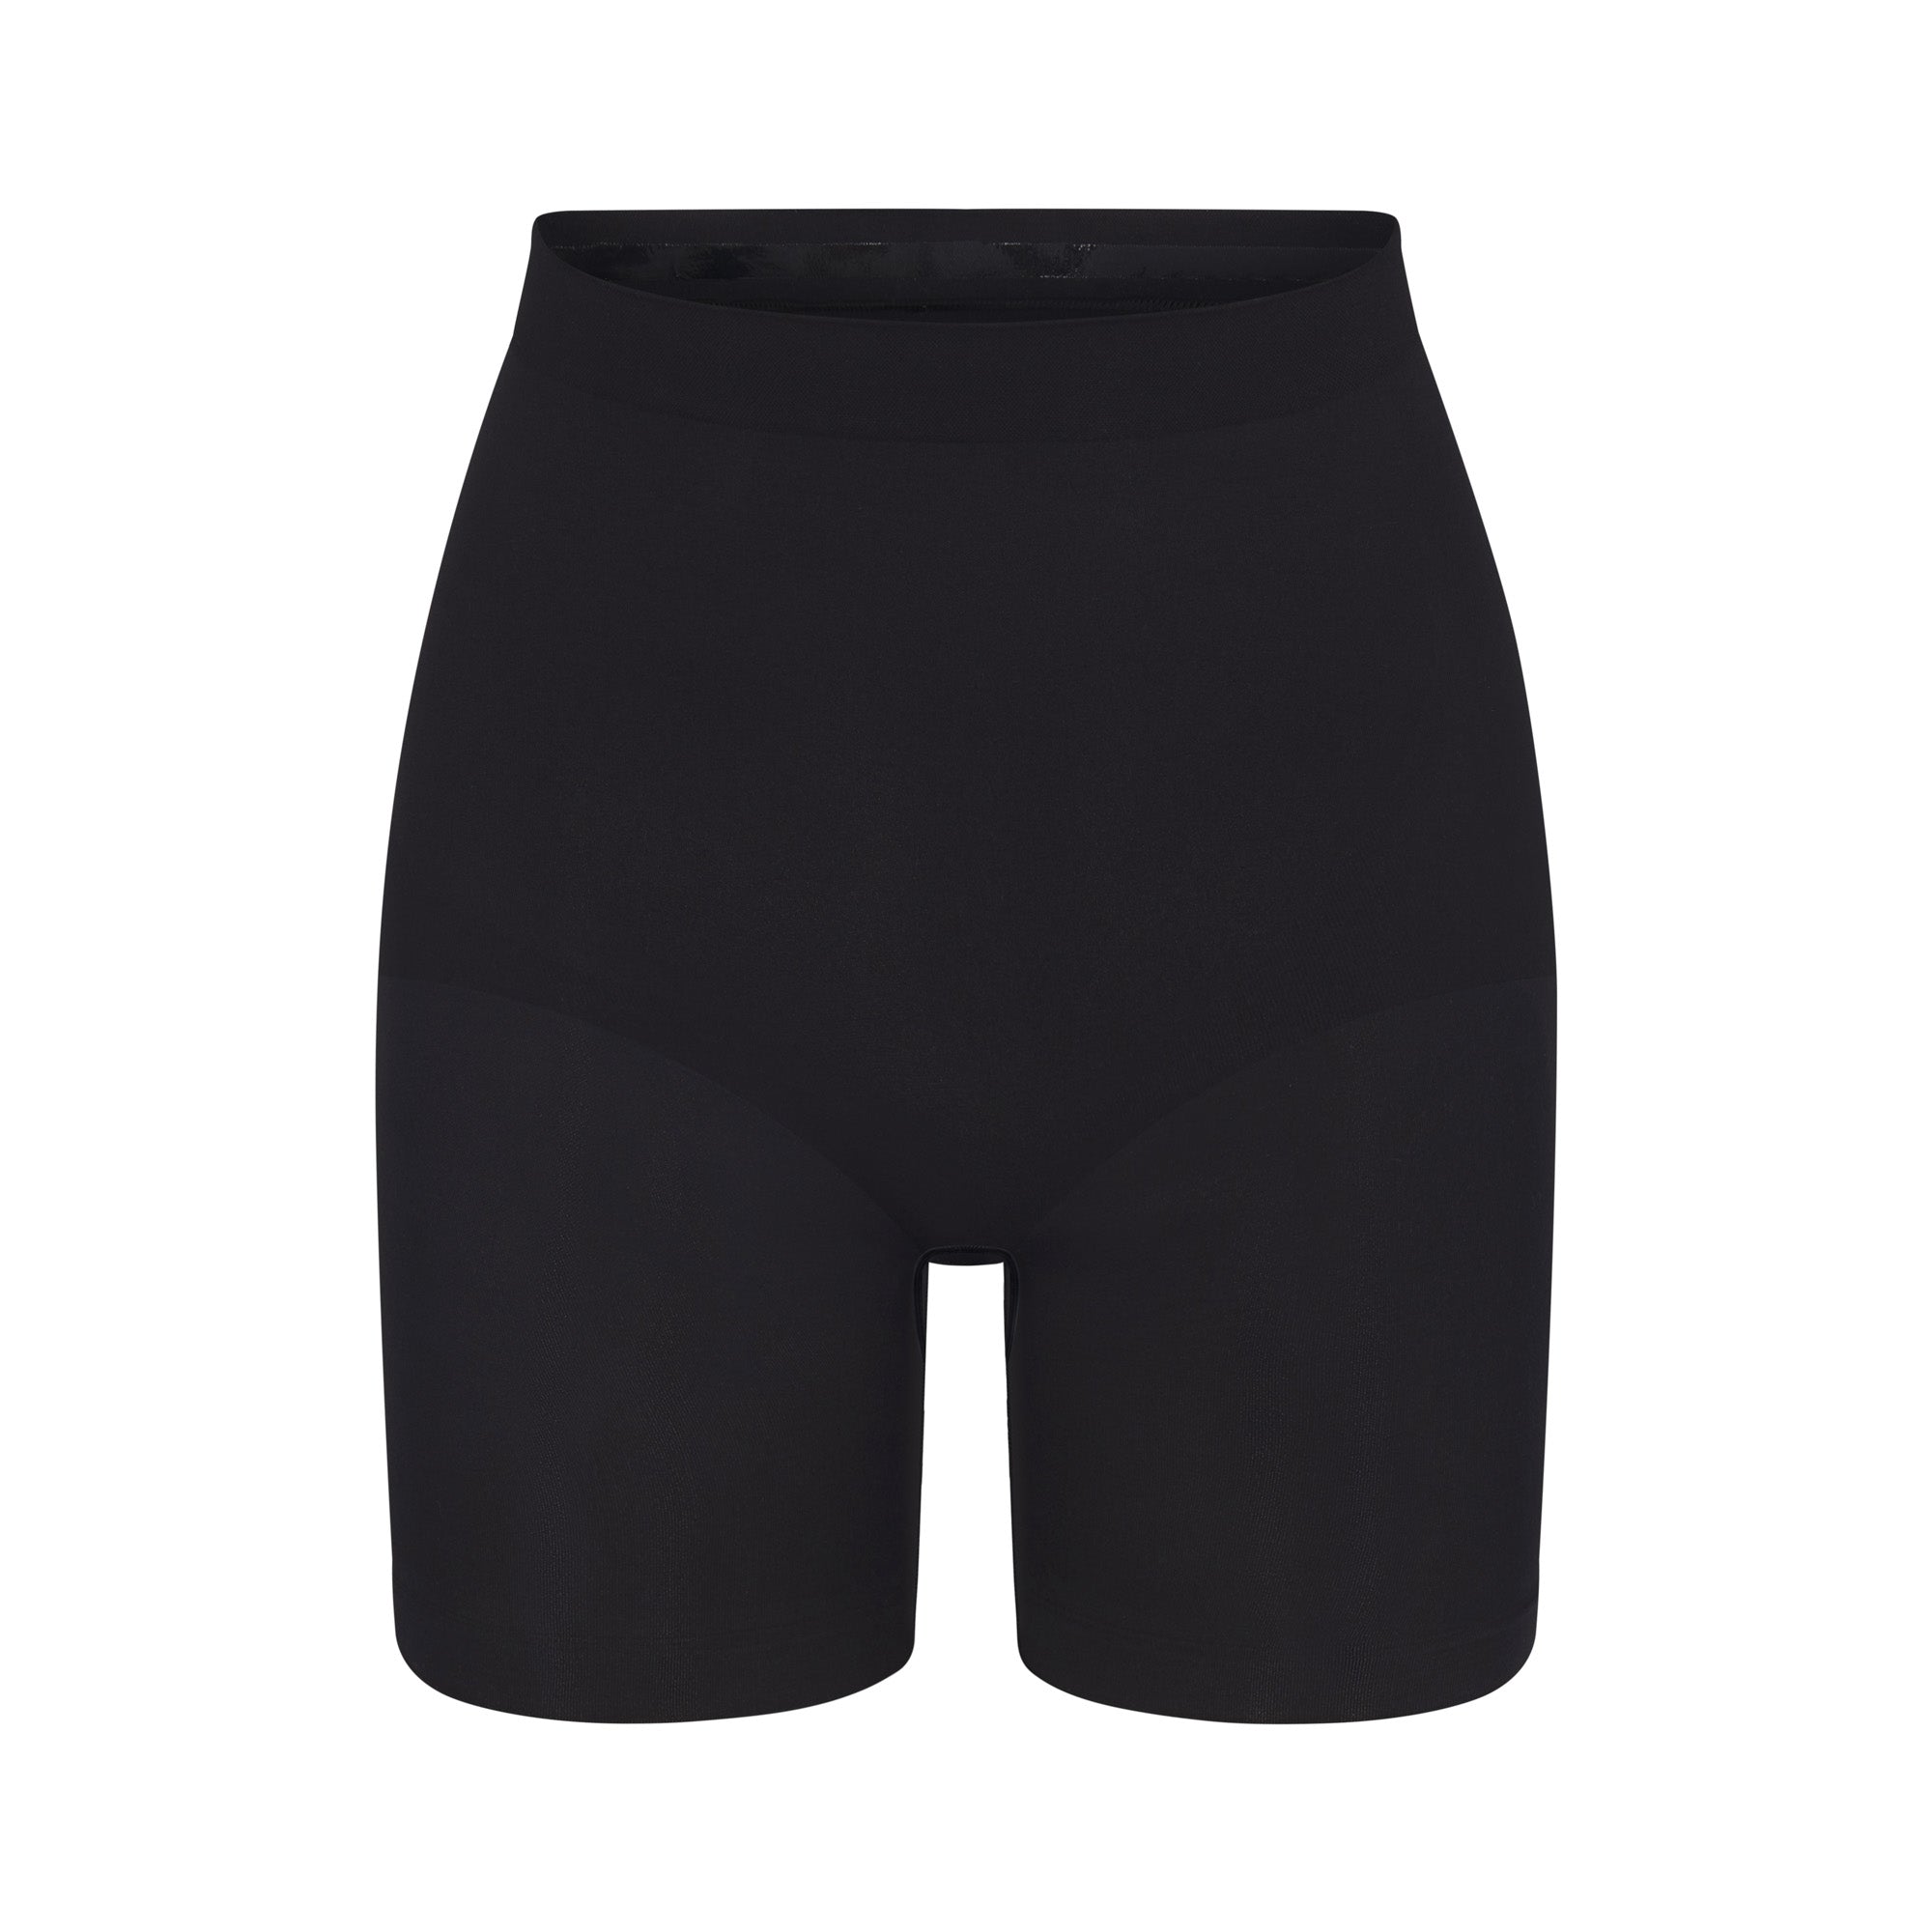 SKIMS Sculpting Shorts Above The Knee With Open Gusset Ochre XXS